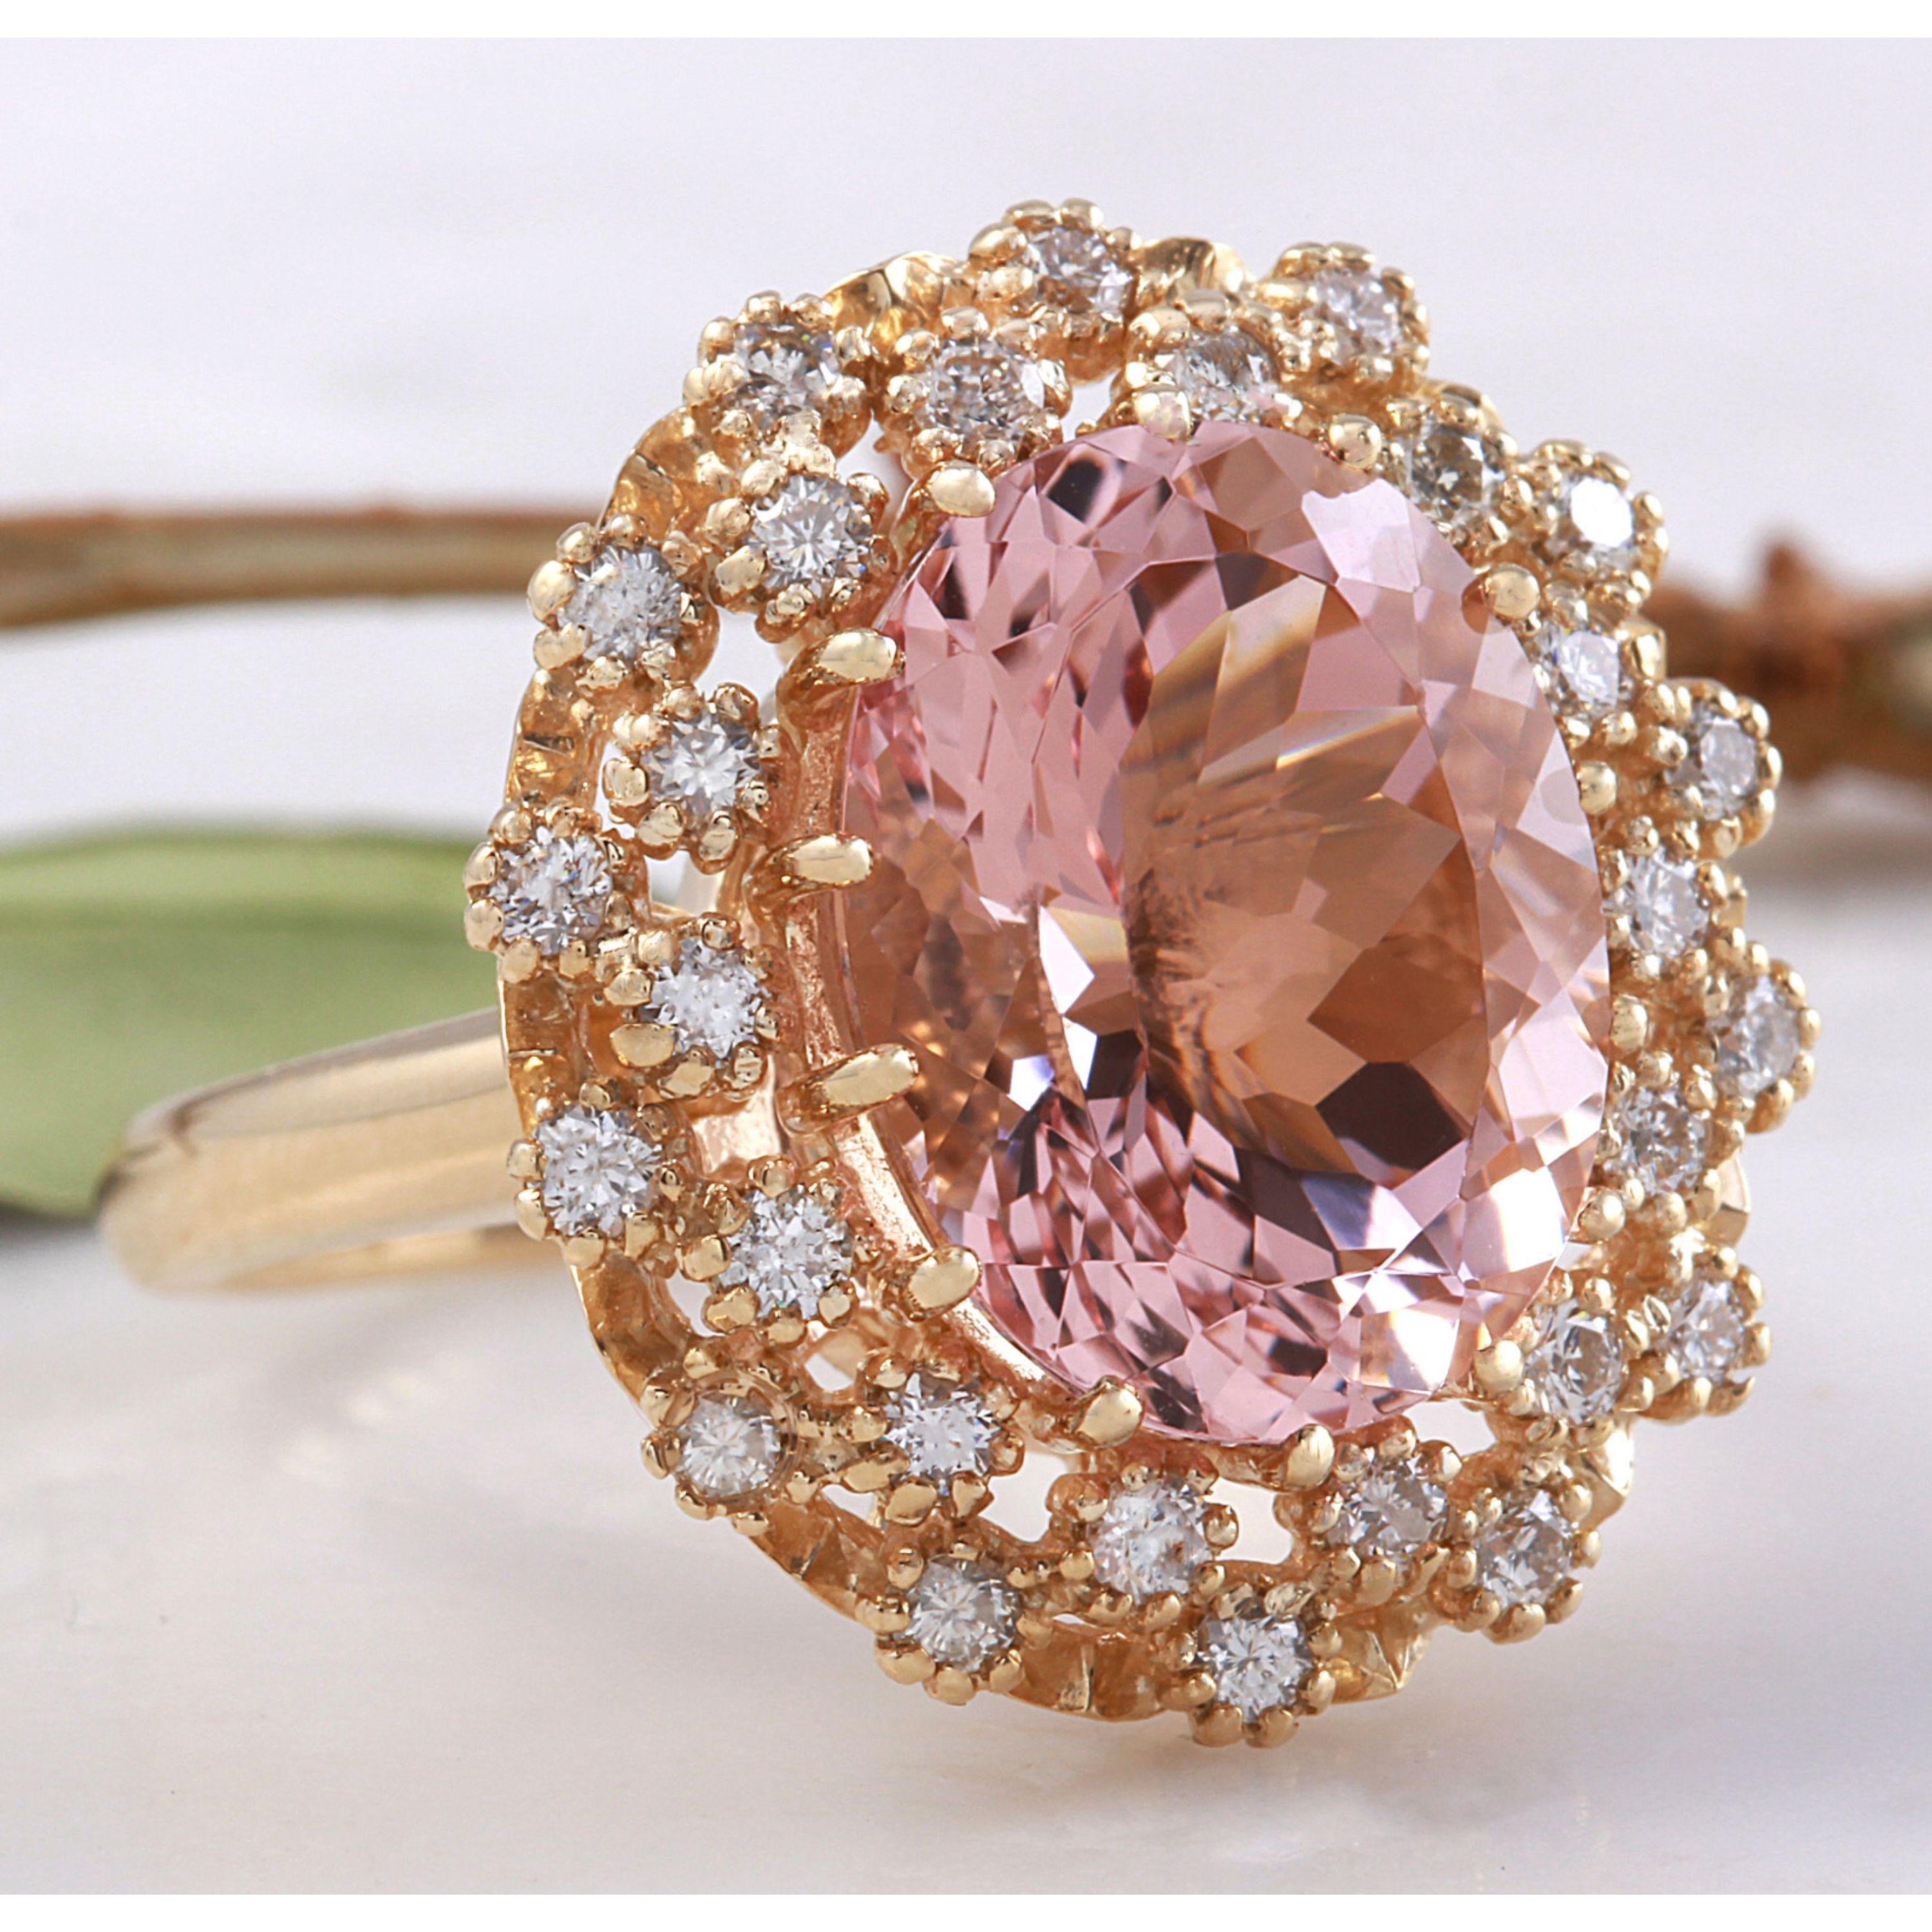 15.30 Carats Exquisite Natural Morganite and Diamond 14K Solid Yellow Gold Ring

Total Natural Oval Morganite Weights: Approx. 14.00 Carats

Morganite Measures: Approx. 18.00 x 14.00mm

Natural Round Diamonds Weight: Approx. 1.30 Carats (color G-H /